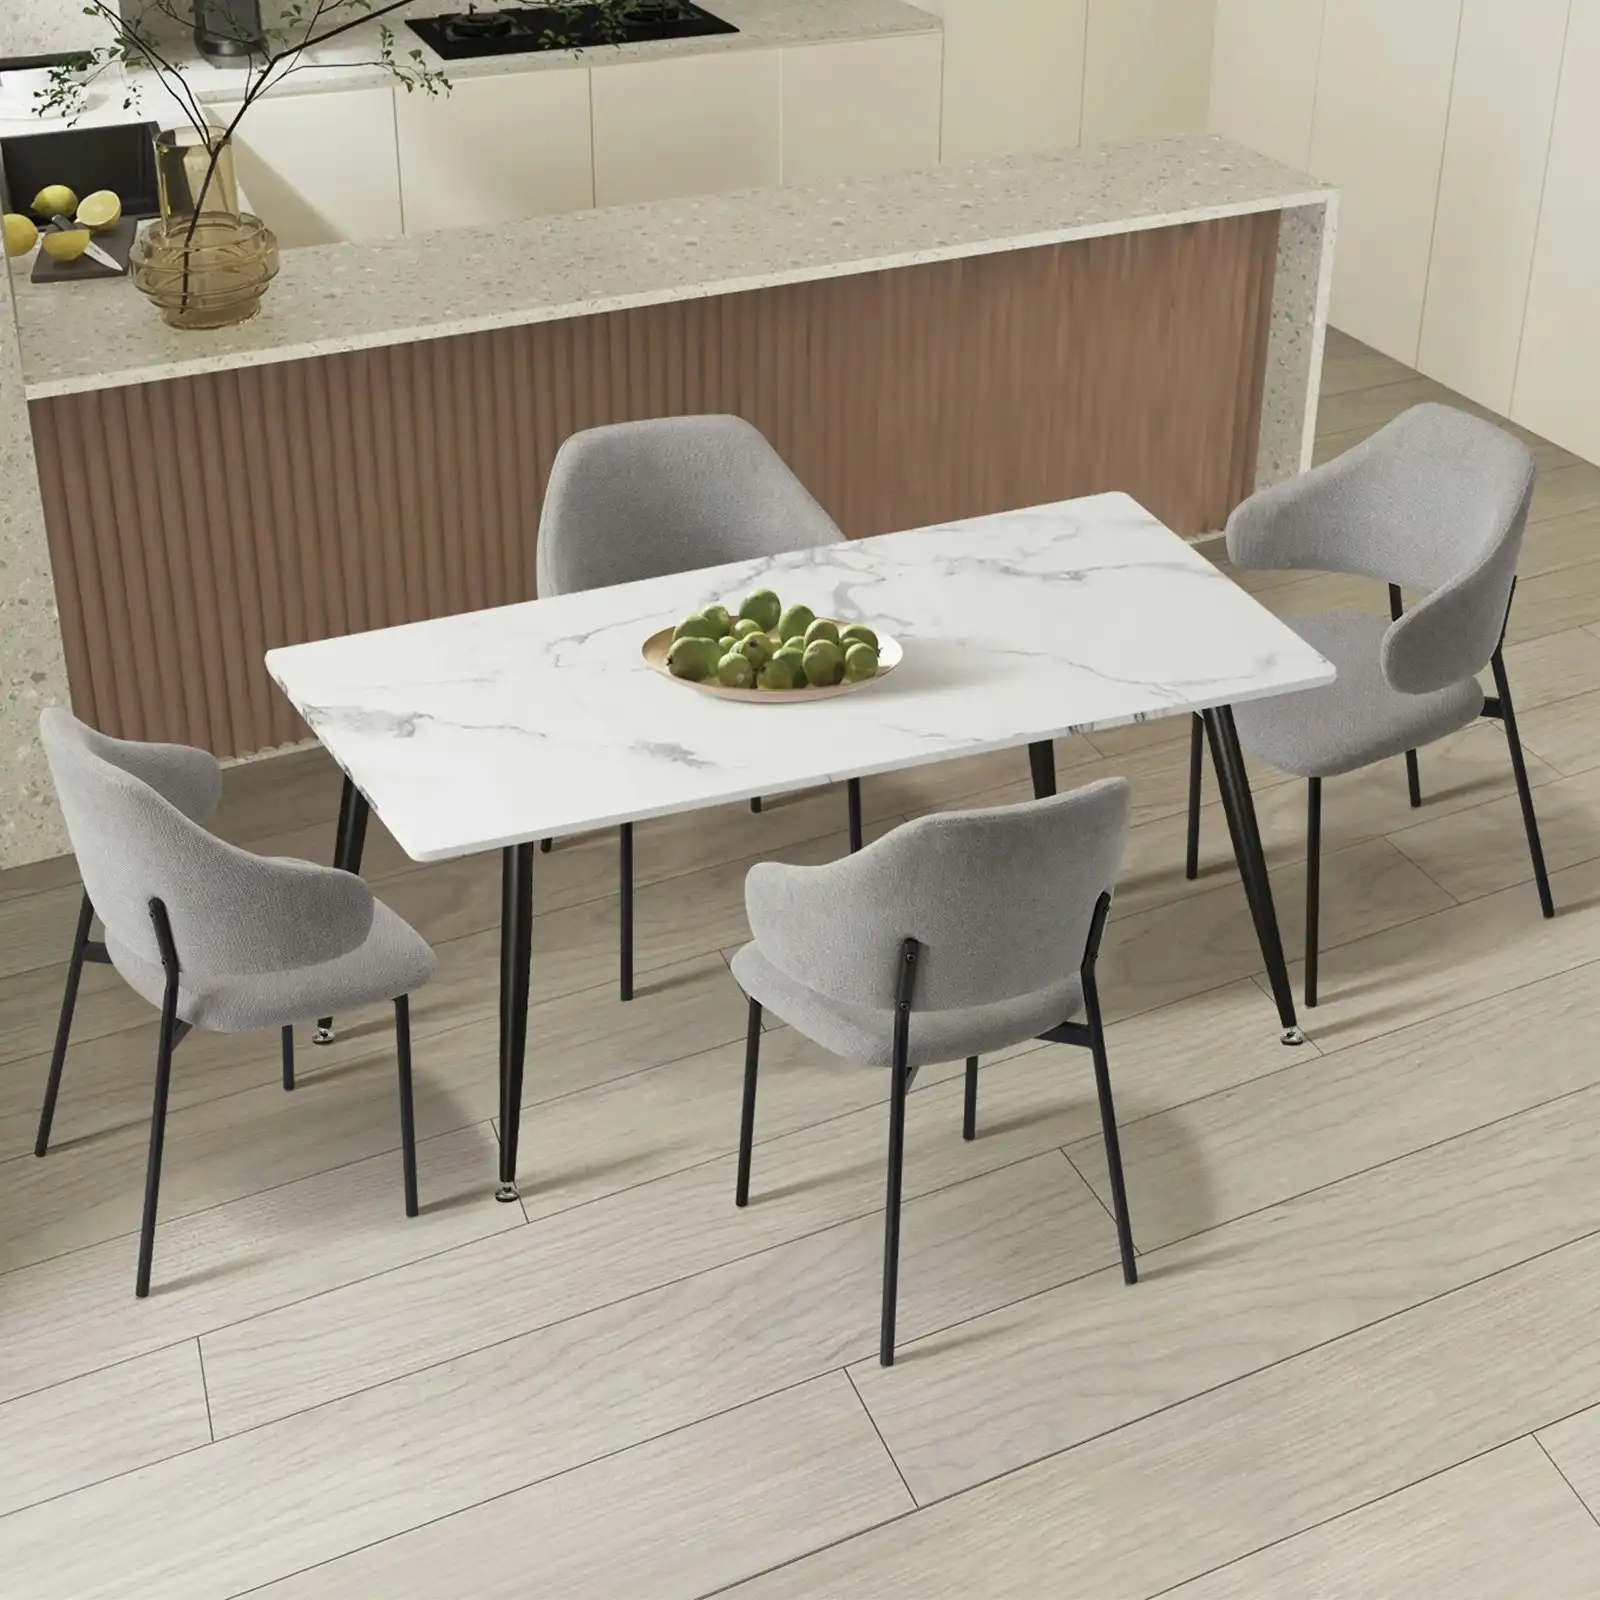 Oikiture 5PCS Dining sets 120cm Rectangle Table with 4PCS Chairs Fabric Grey